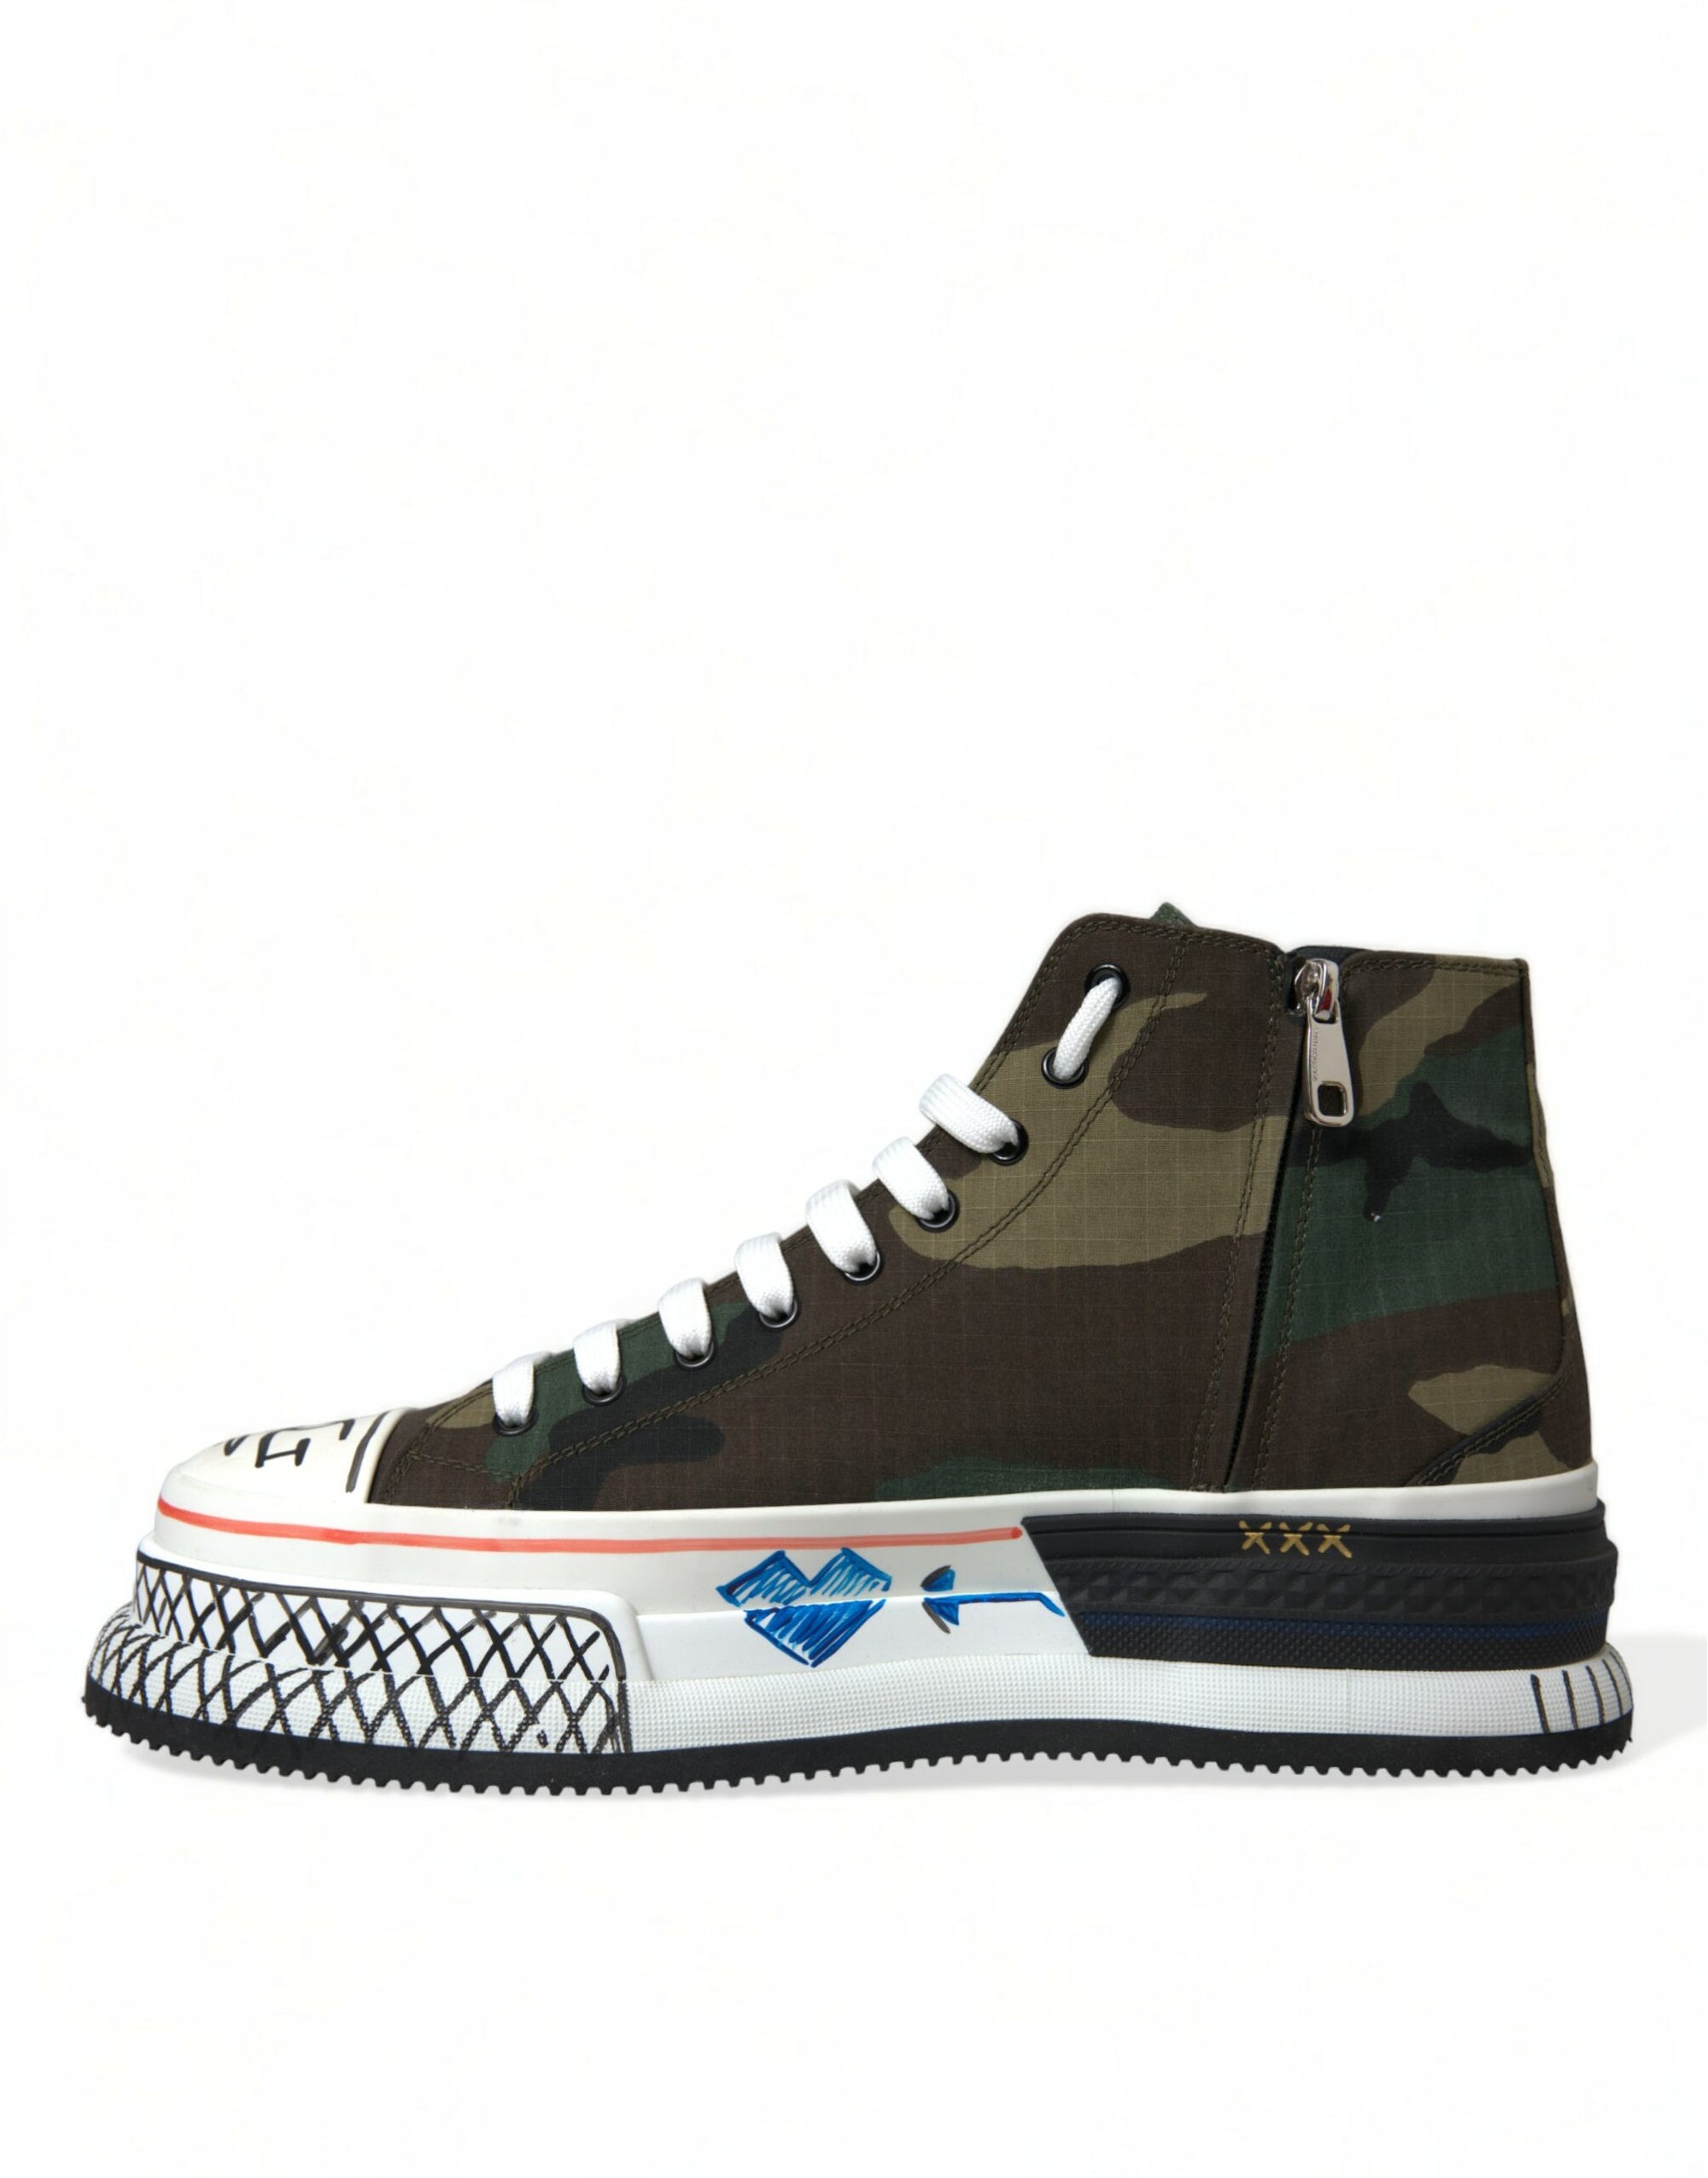 Camouflage Canvas High-Top Sneakers